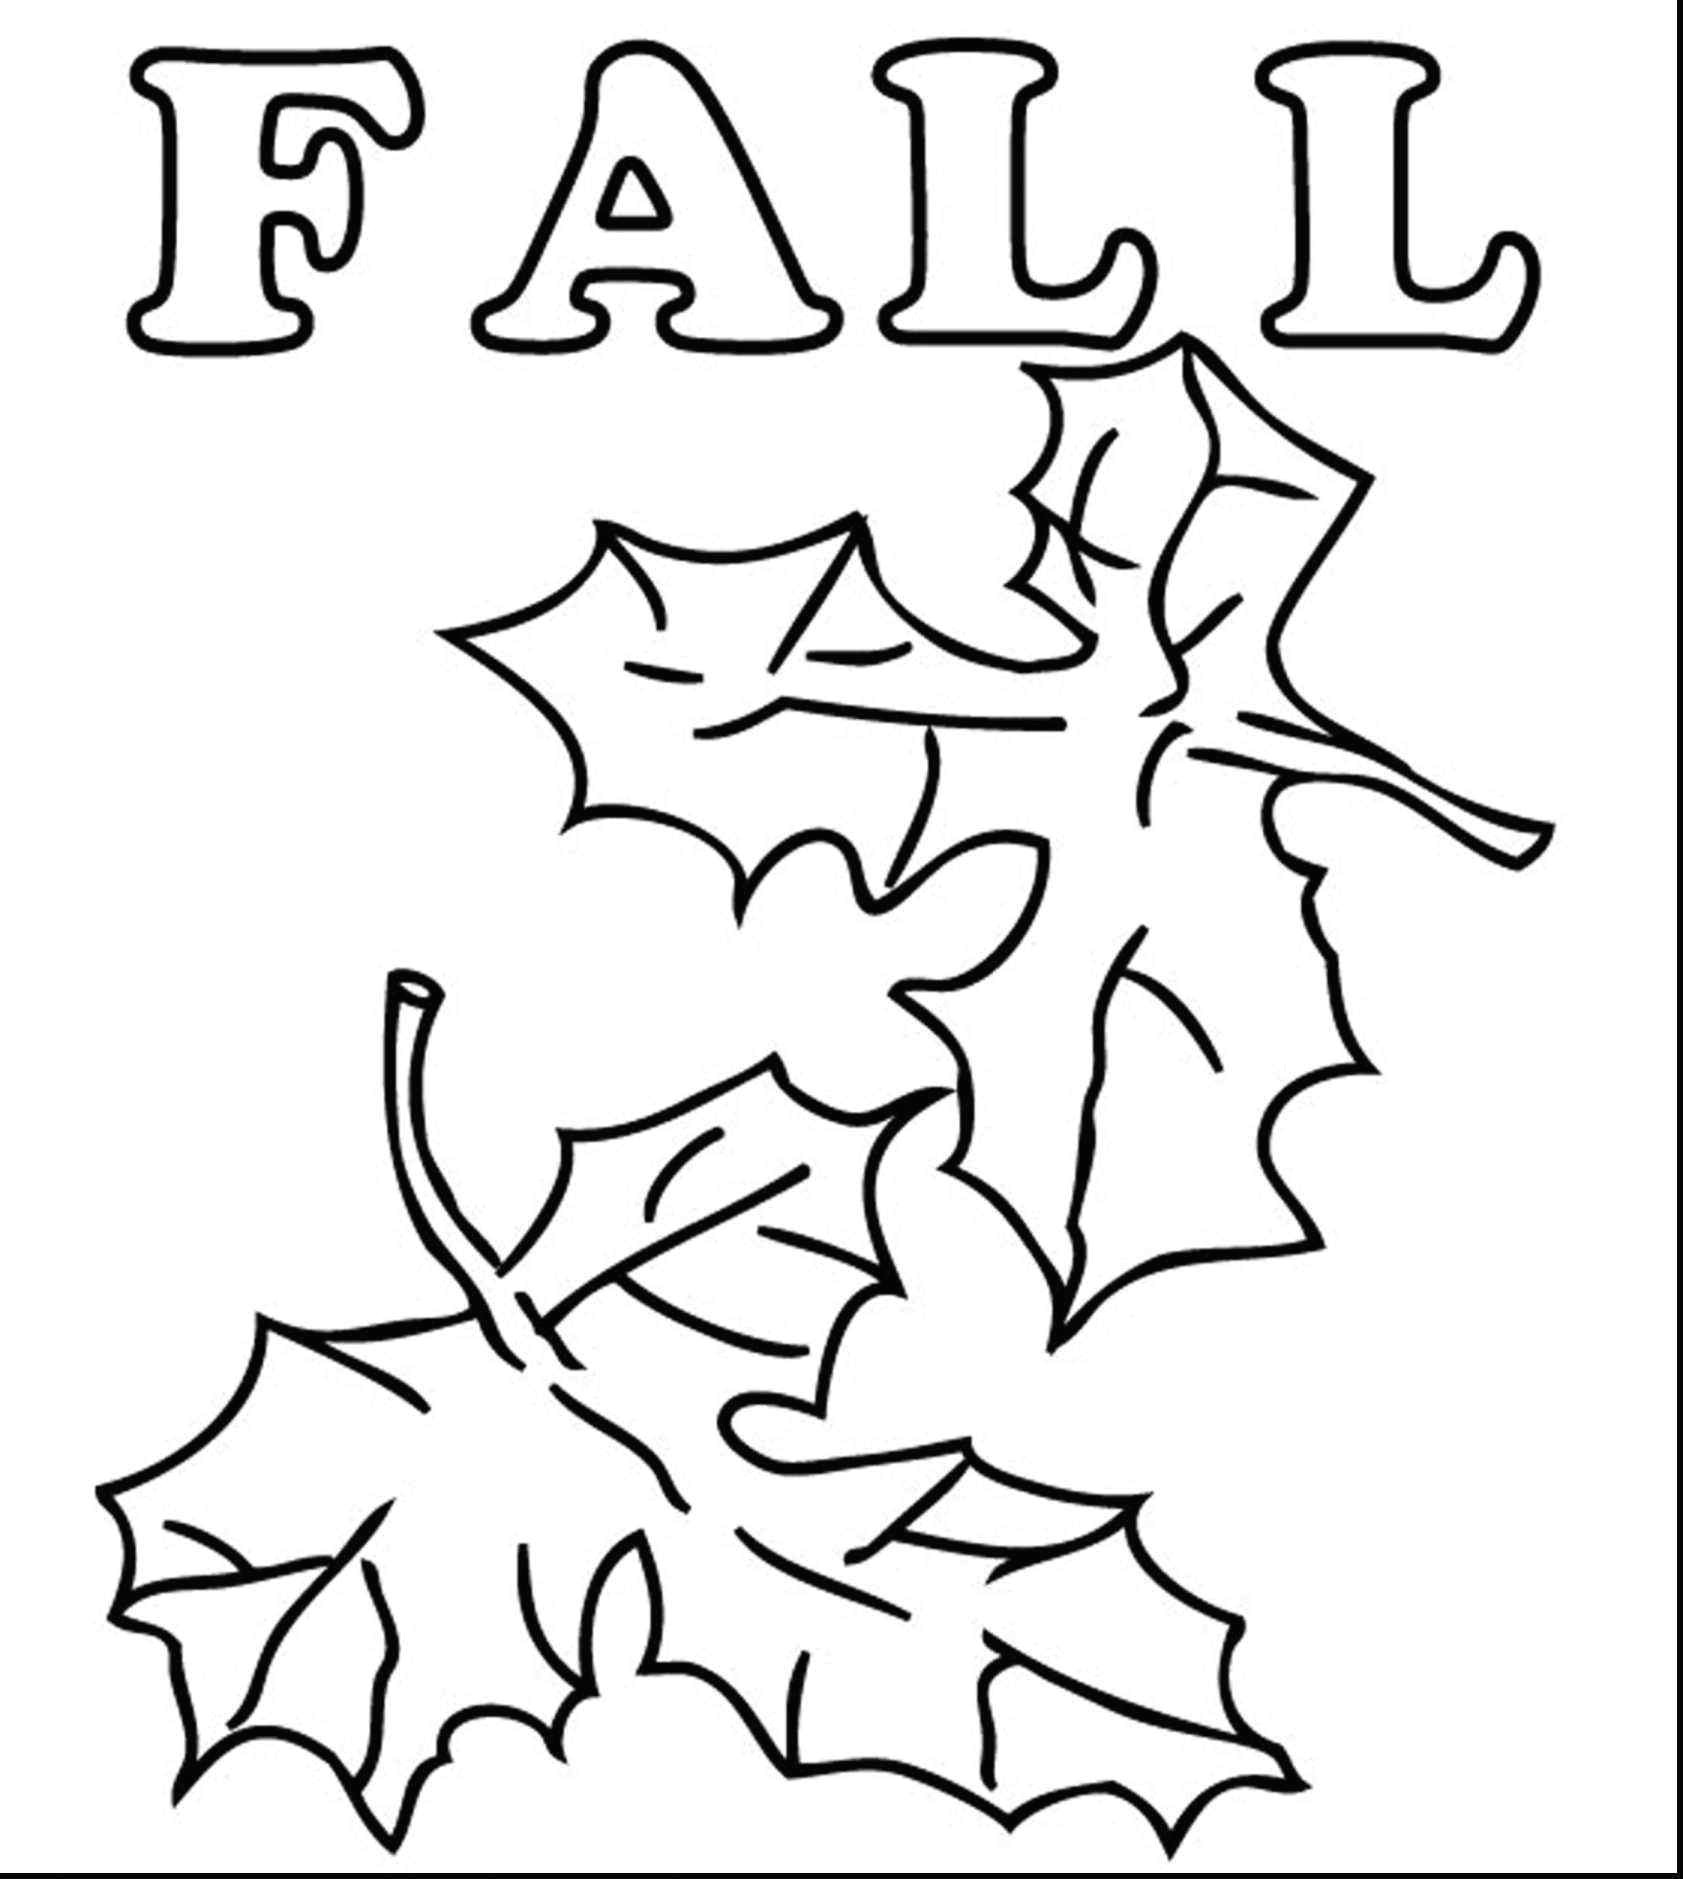 simple christmas tree coloring page autumn printable coloring pages unique best coloring page adult od